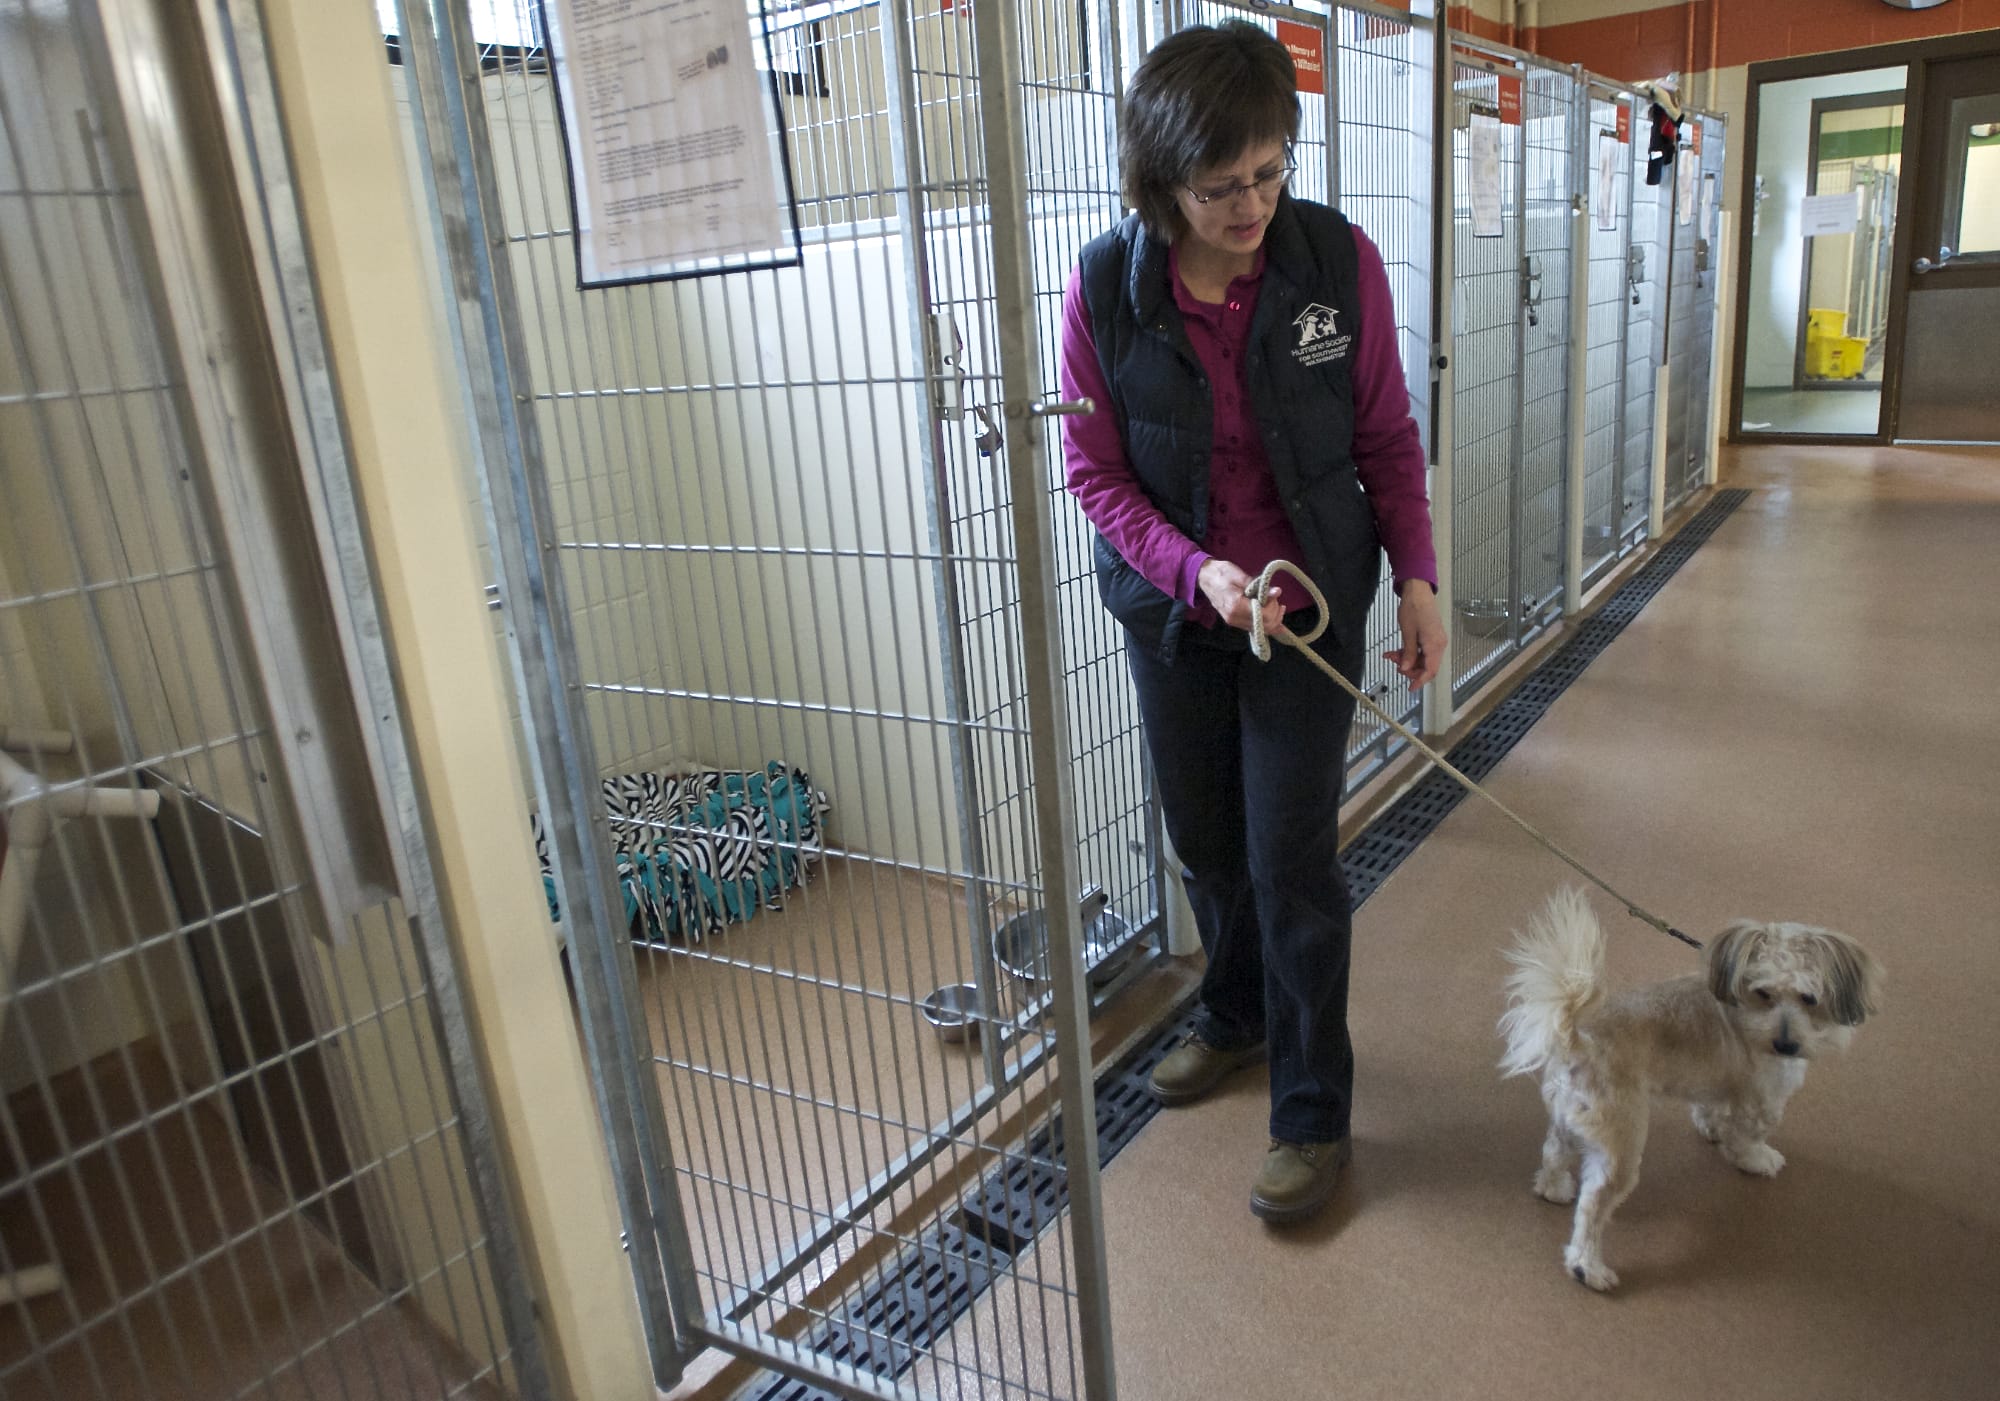 Carmen LeBlanc, supervisor of animal health and behavior at the Humane Society for Southwest Washington, works April 14 with Rover, who can be aggressive when he is moved from his position, such as in a chair or sofa.